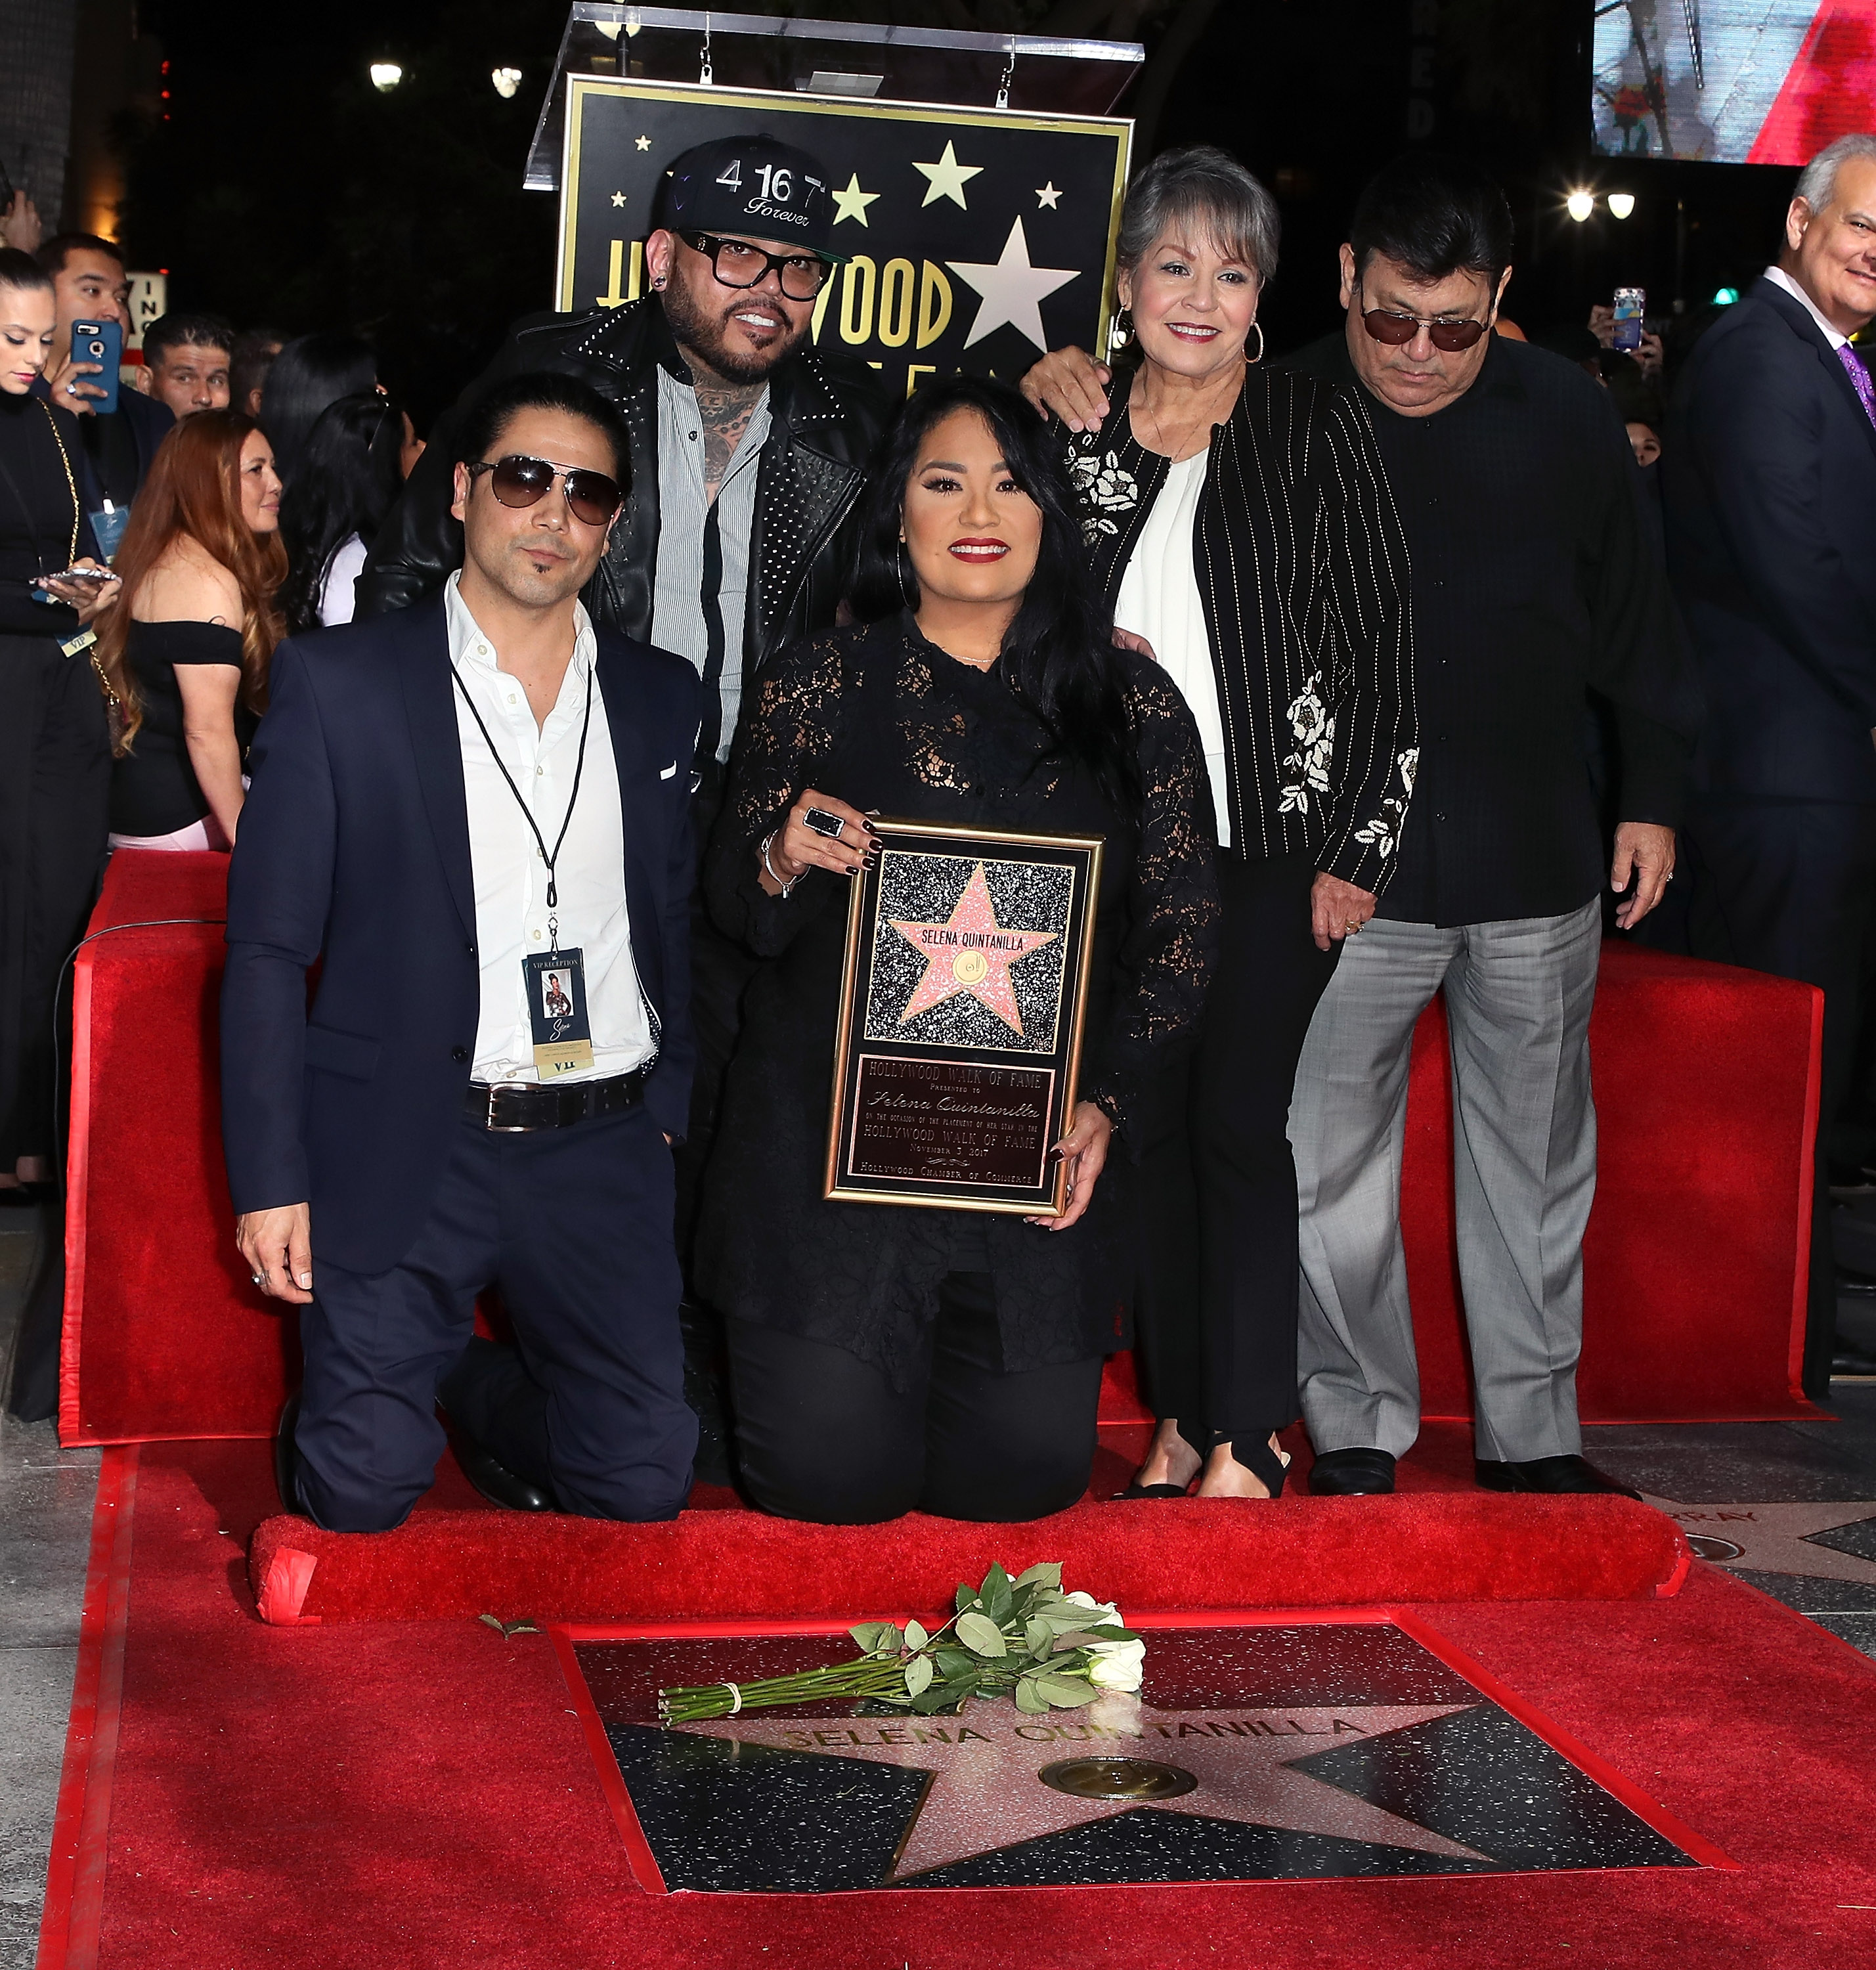 Chris Perez, A.B. Quintanilla III, Suzette Quintanilla, Marcella Samora and Abraham Quintanilla Jr. at the ceremony honoring Selena with a Star on the Hollywood Walk of Fame on November 3, 2017, in Hollywood, California. | Source: Getty Images